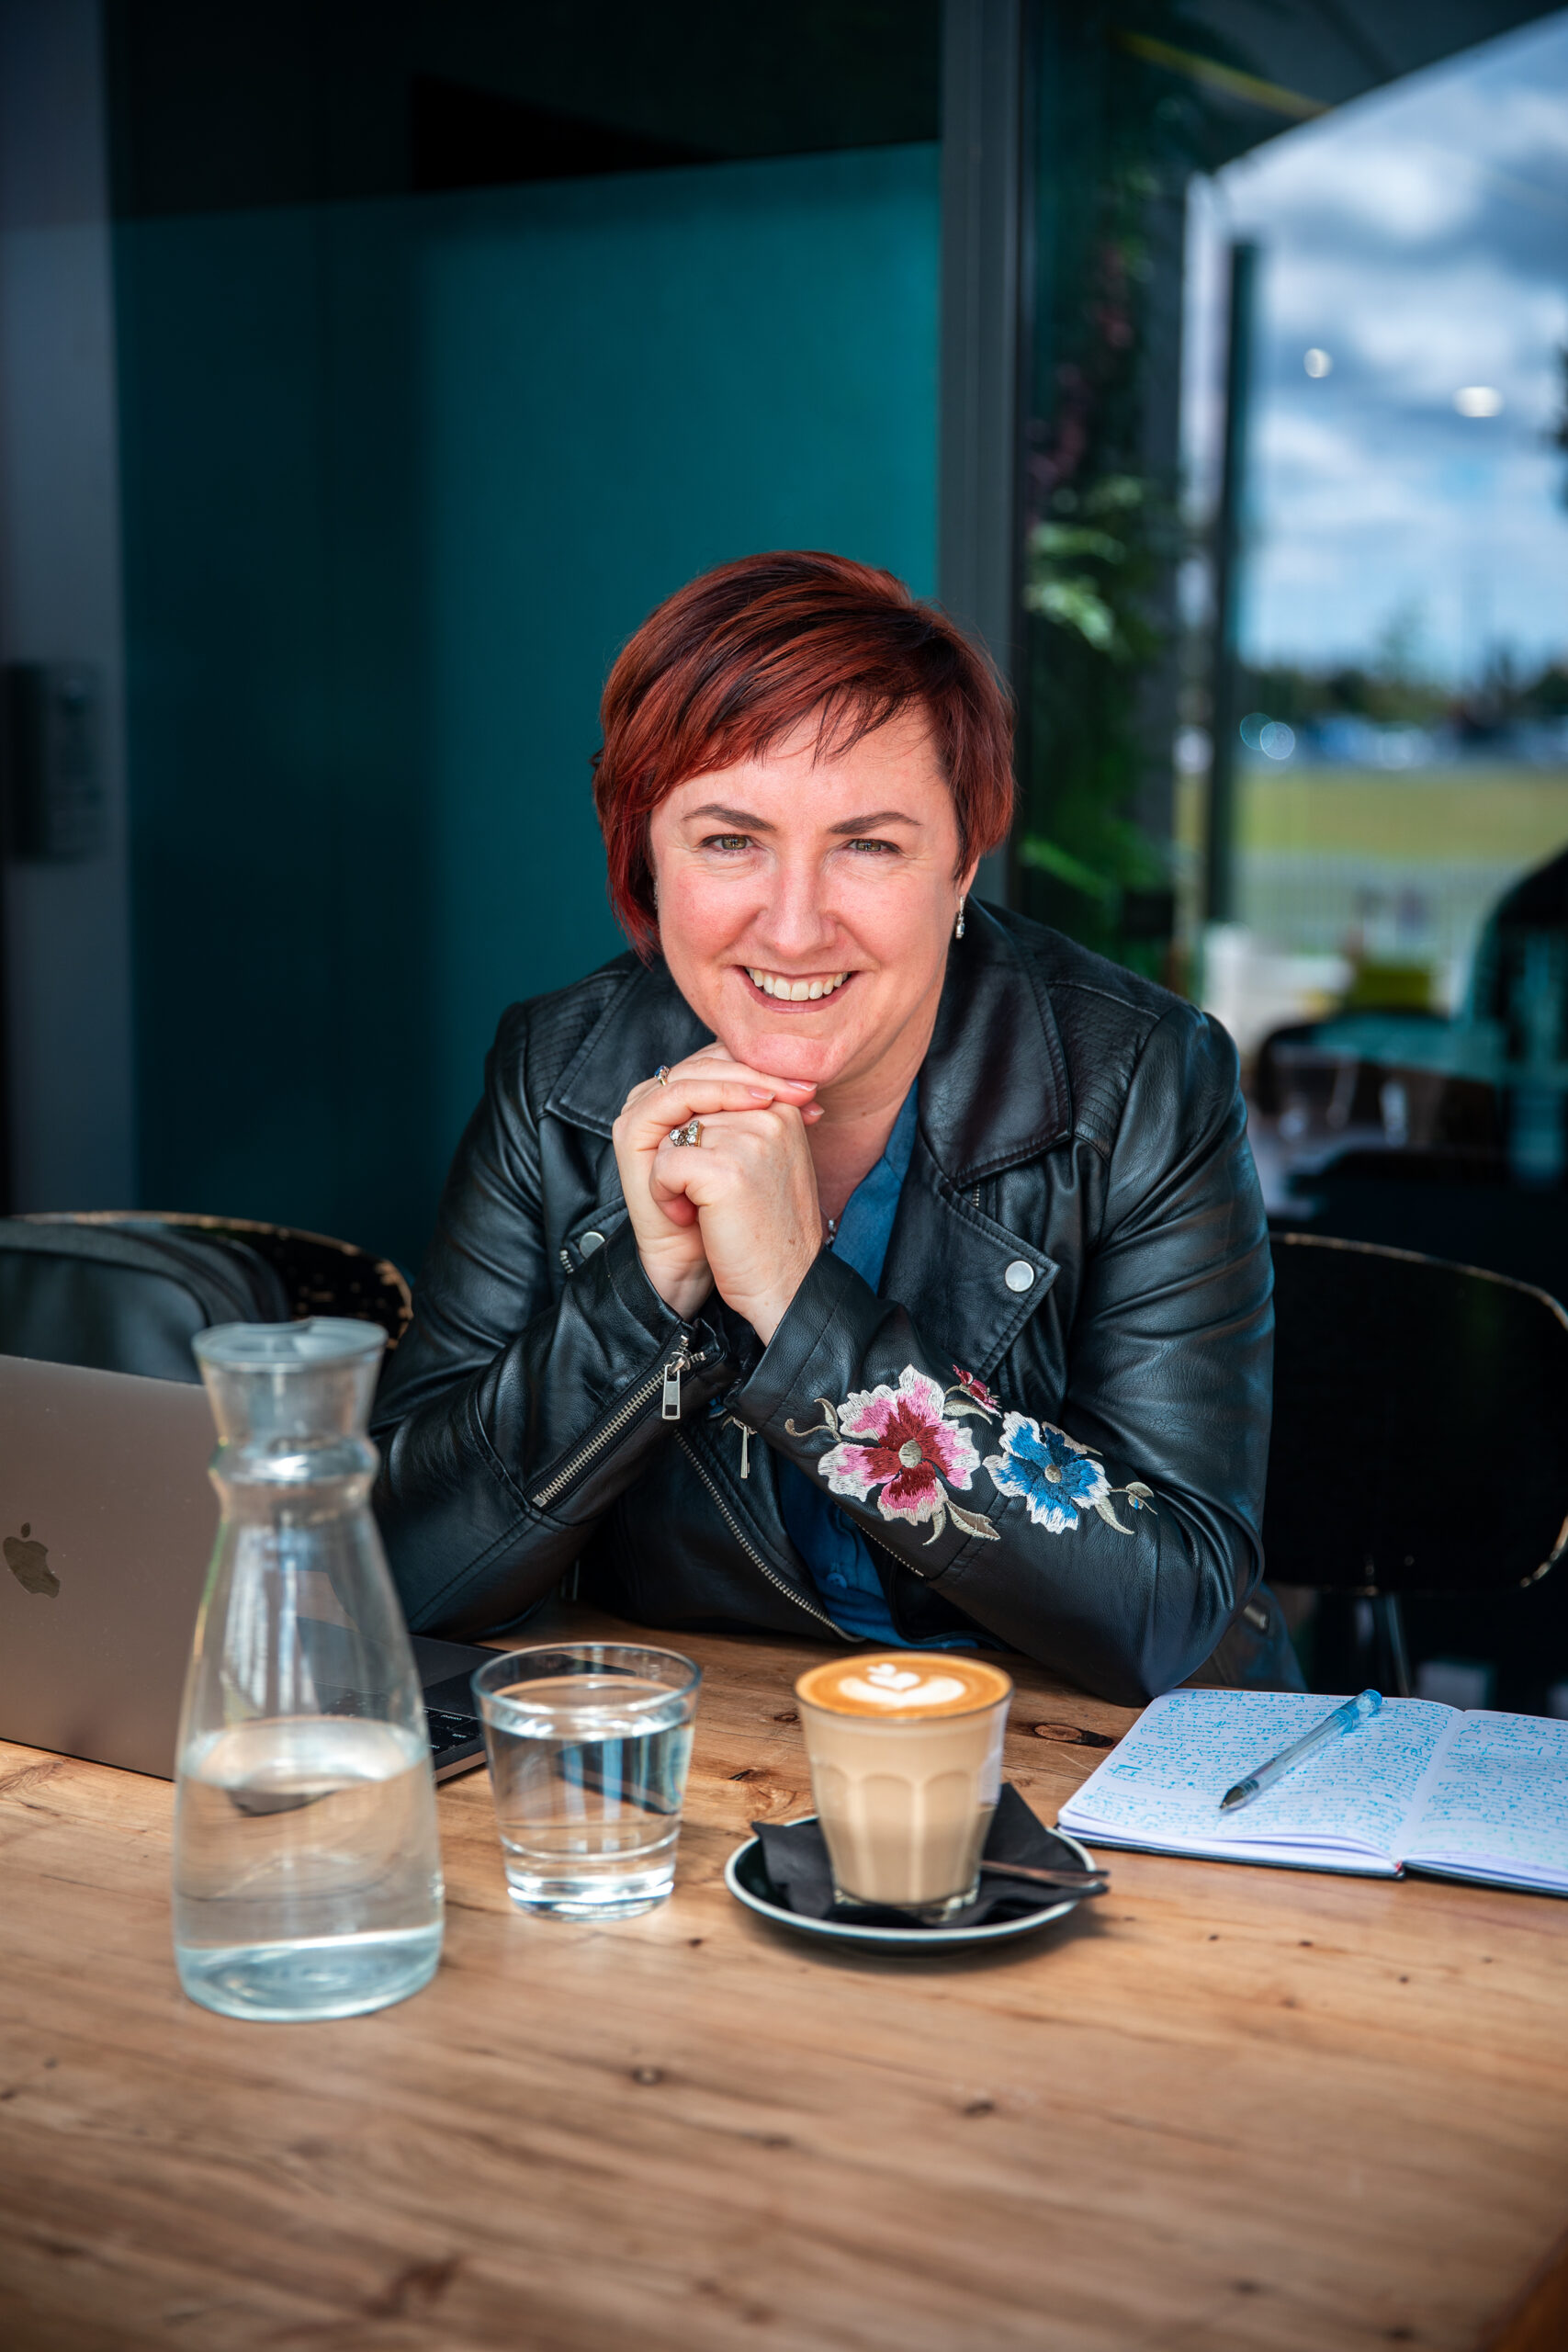 Kerrie sits in a cafe at a wooden table with her chin resting on her hands. She wears a black leather jacket with floral embroidery on the left sleeve. On the table in front of her is a laptop, pen on top of a journal, cup of coffee and a carafe and glass of water.